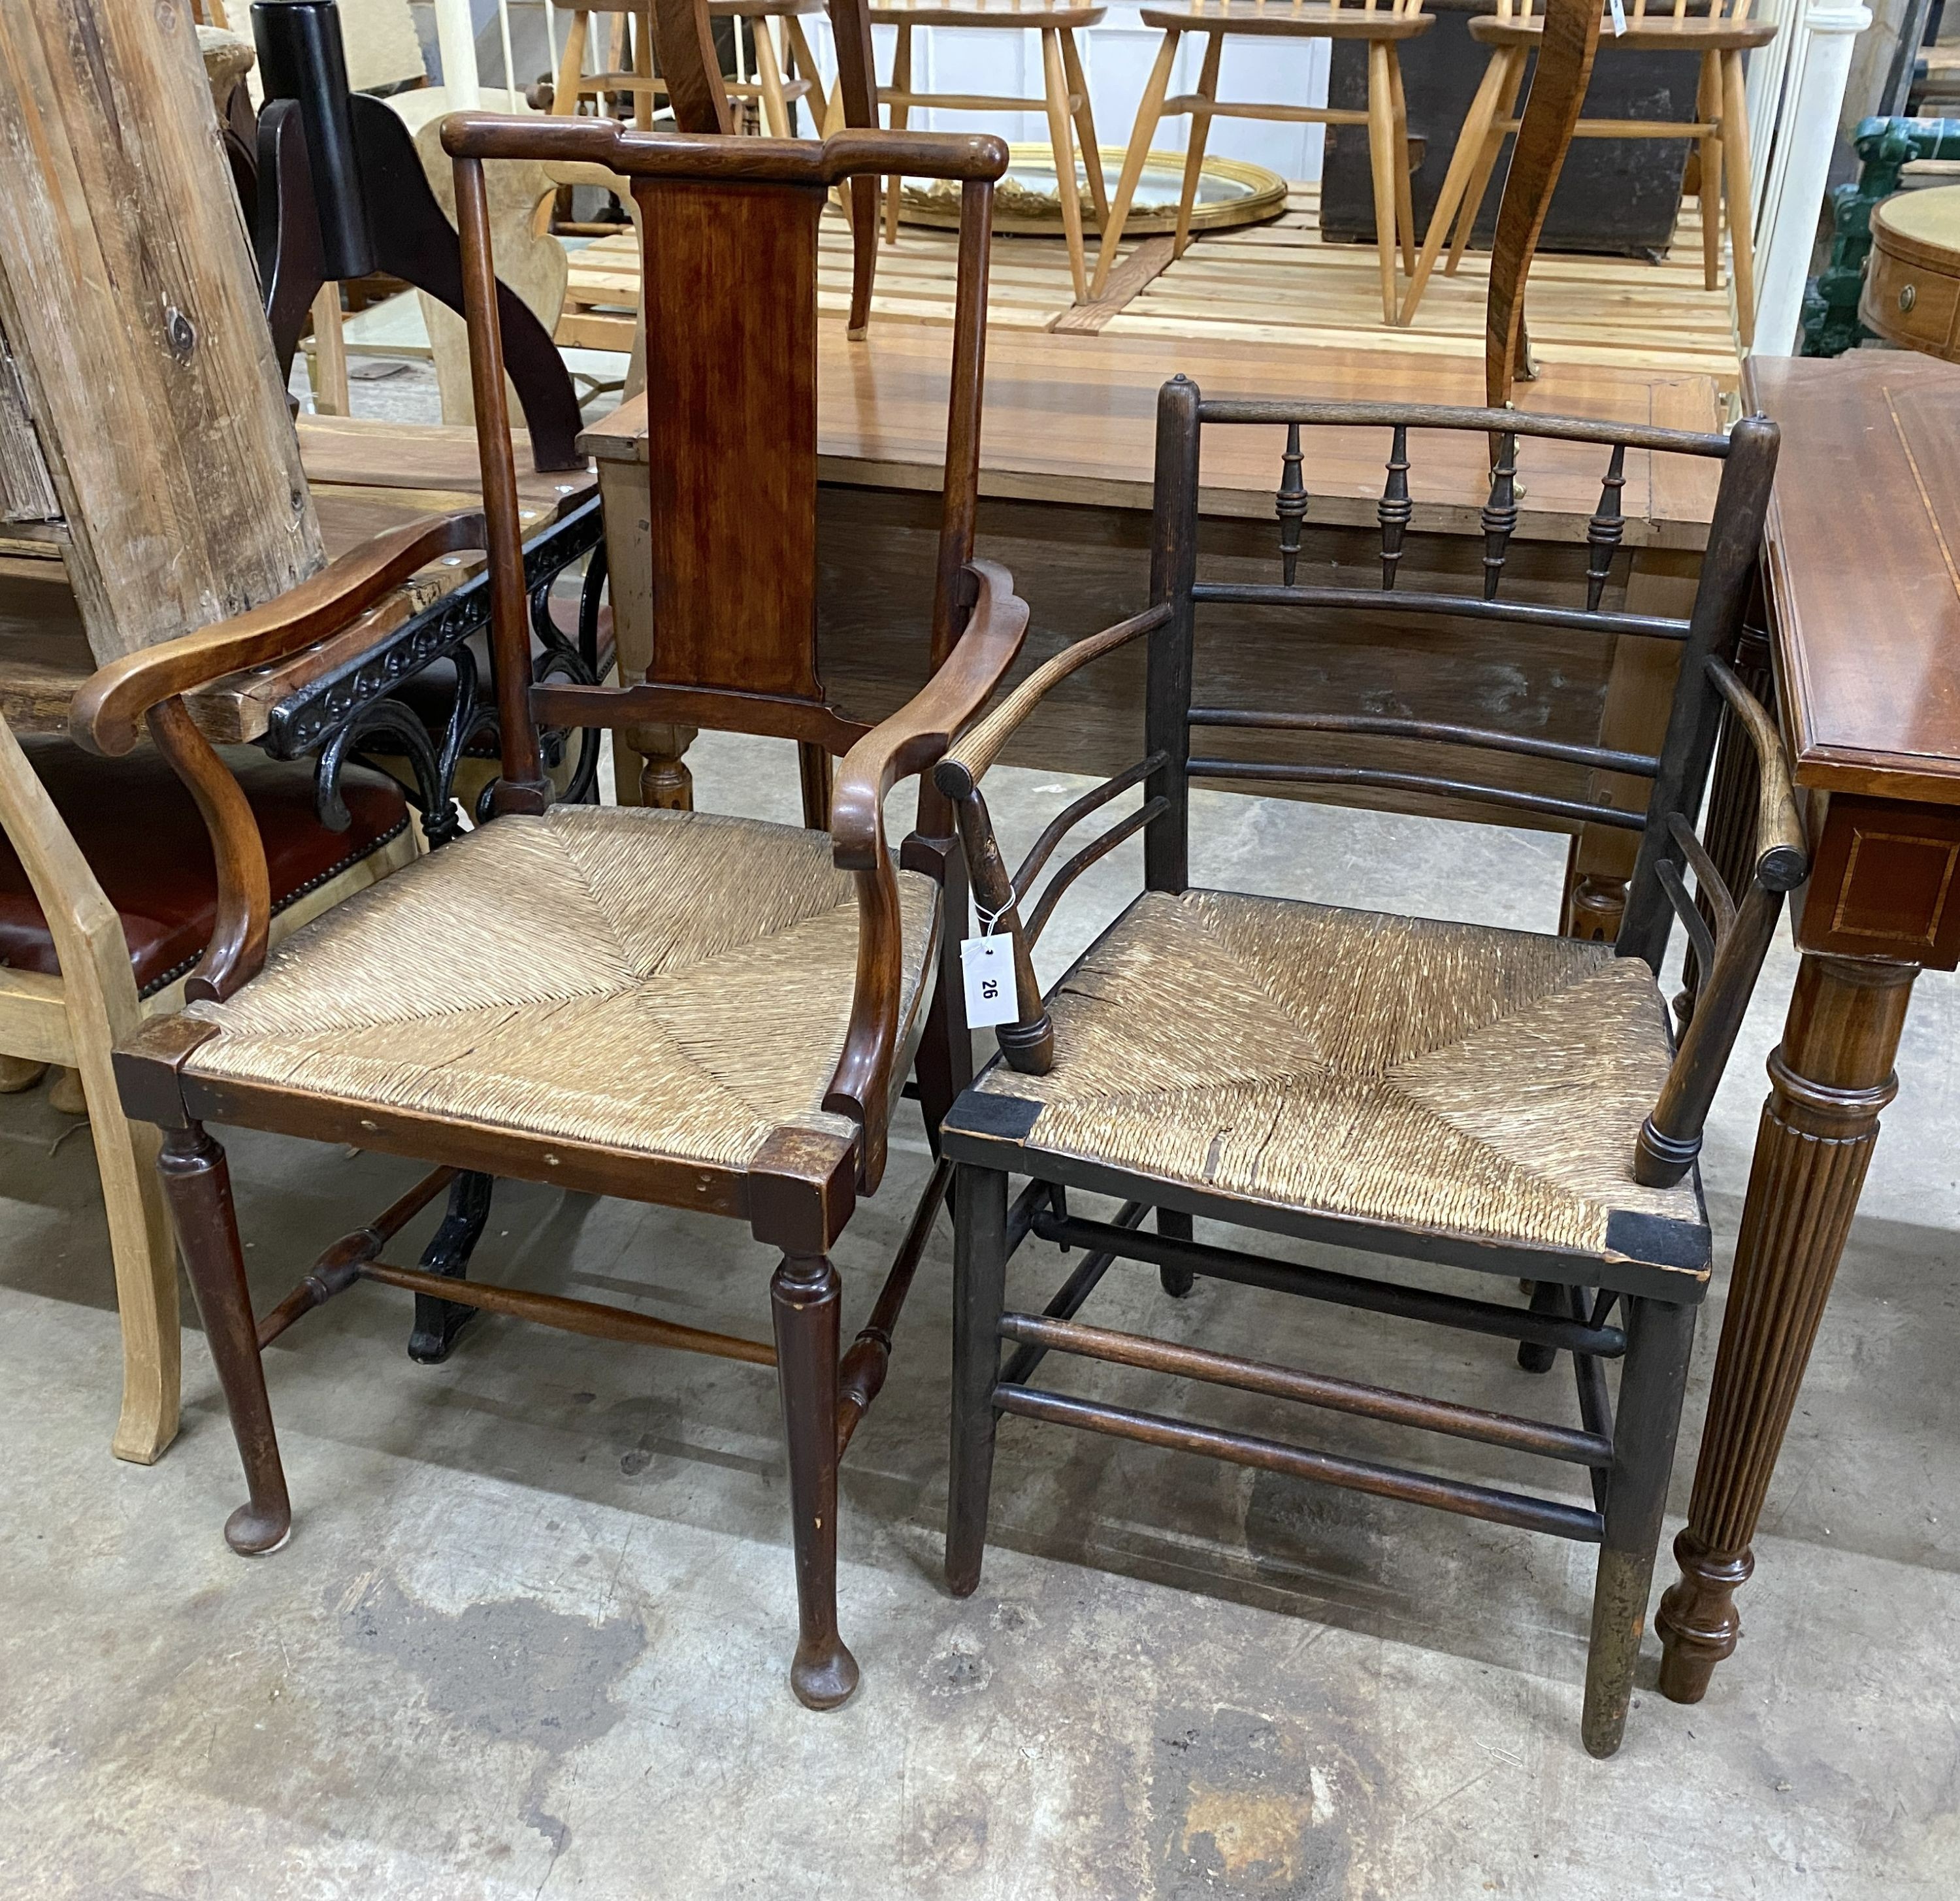 A 19th century ash Sussex chair and an Arts & Crafts rush seat chair, designed by Norman Shaw